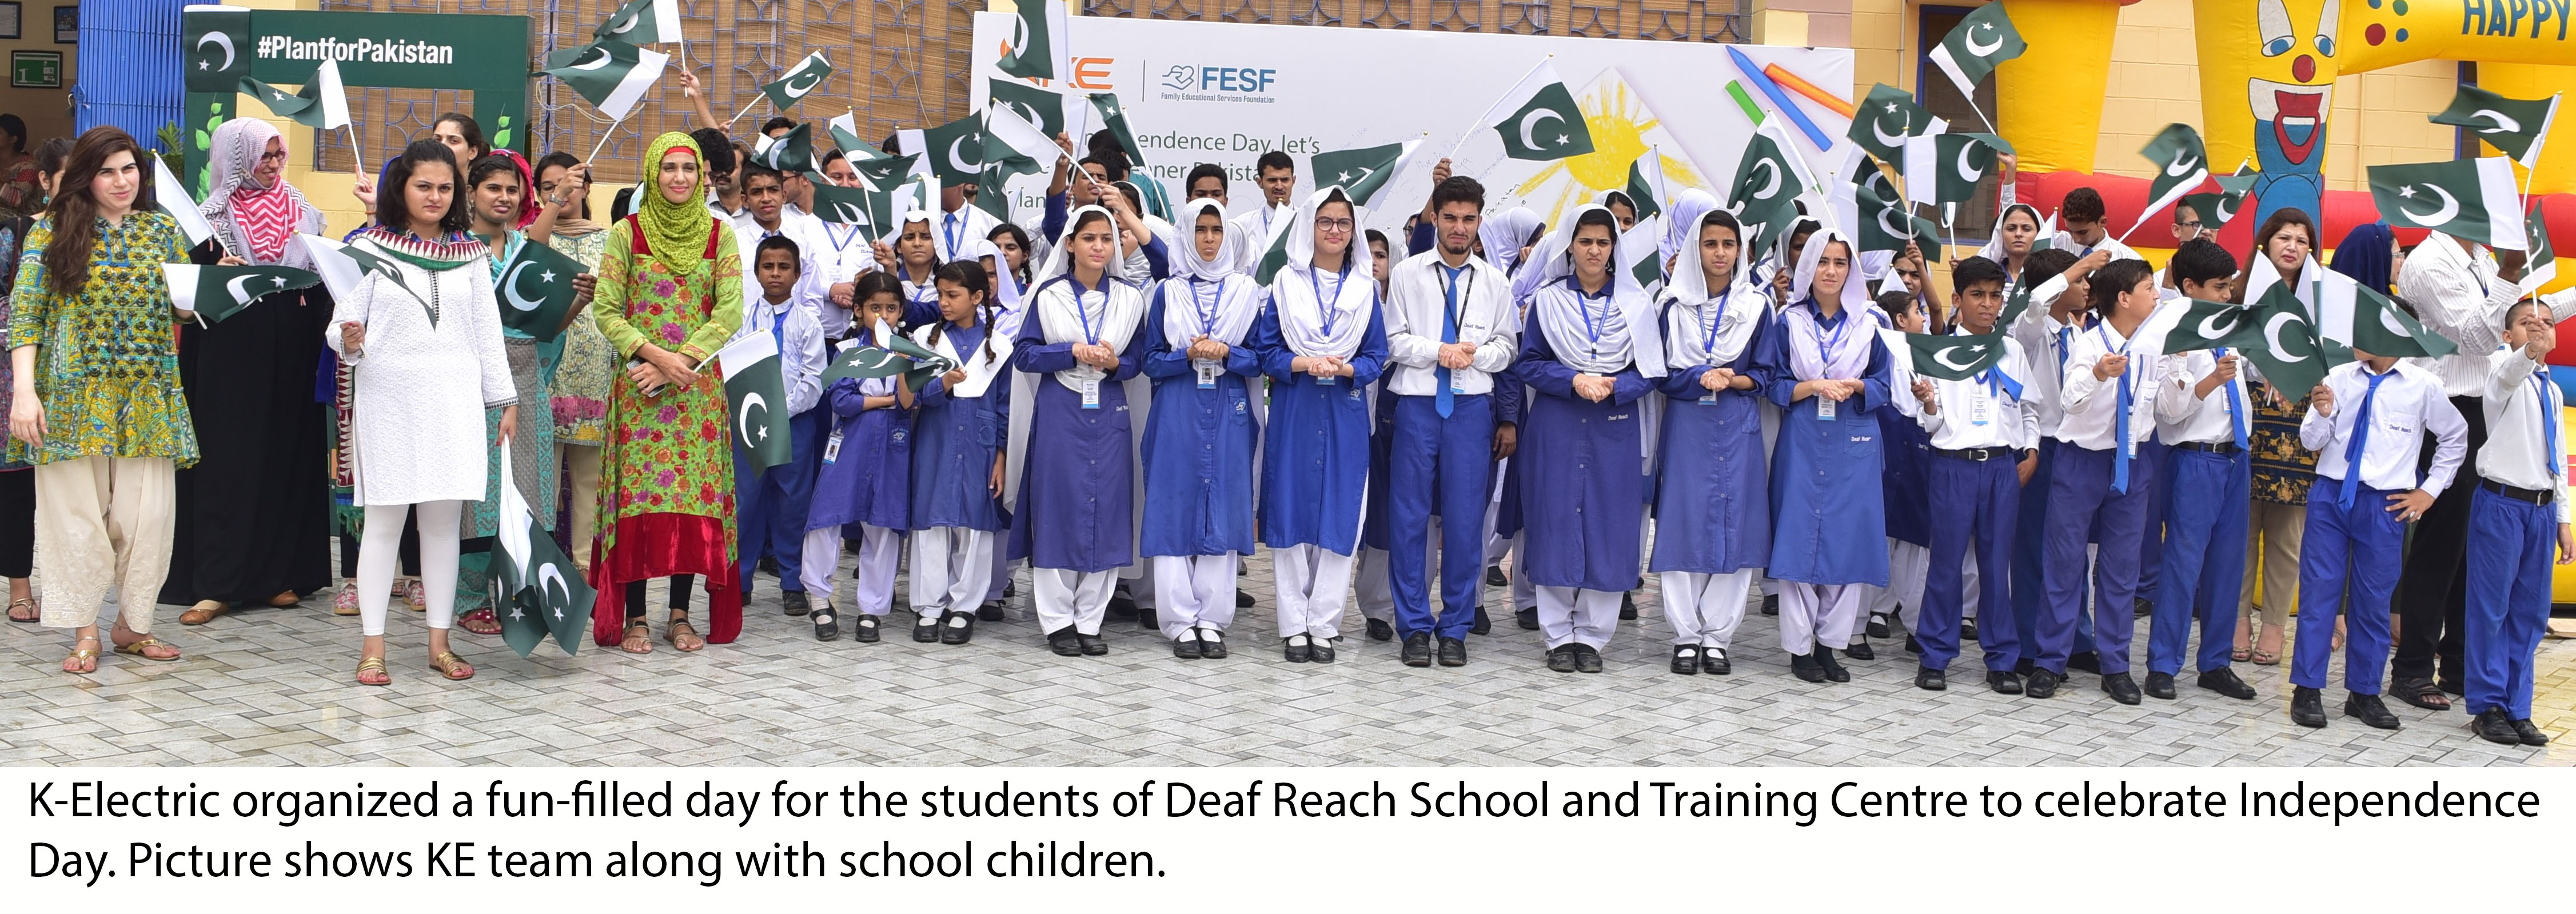 K-Electric-team-visits-Deaf-Reach-School-to-celebrate-Independence-Day